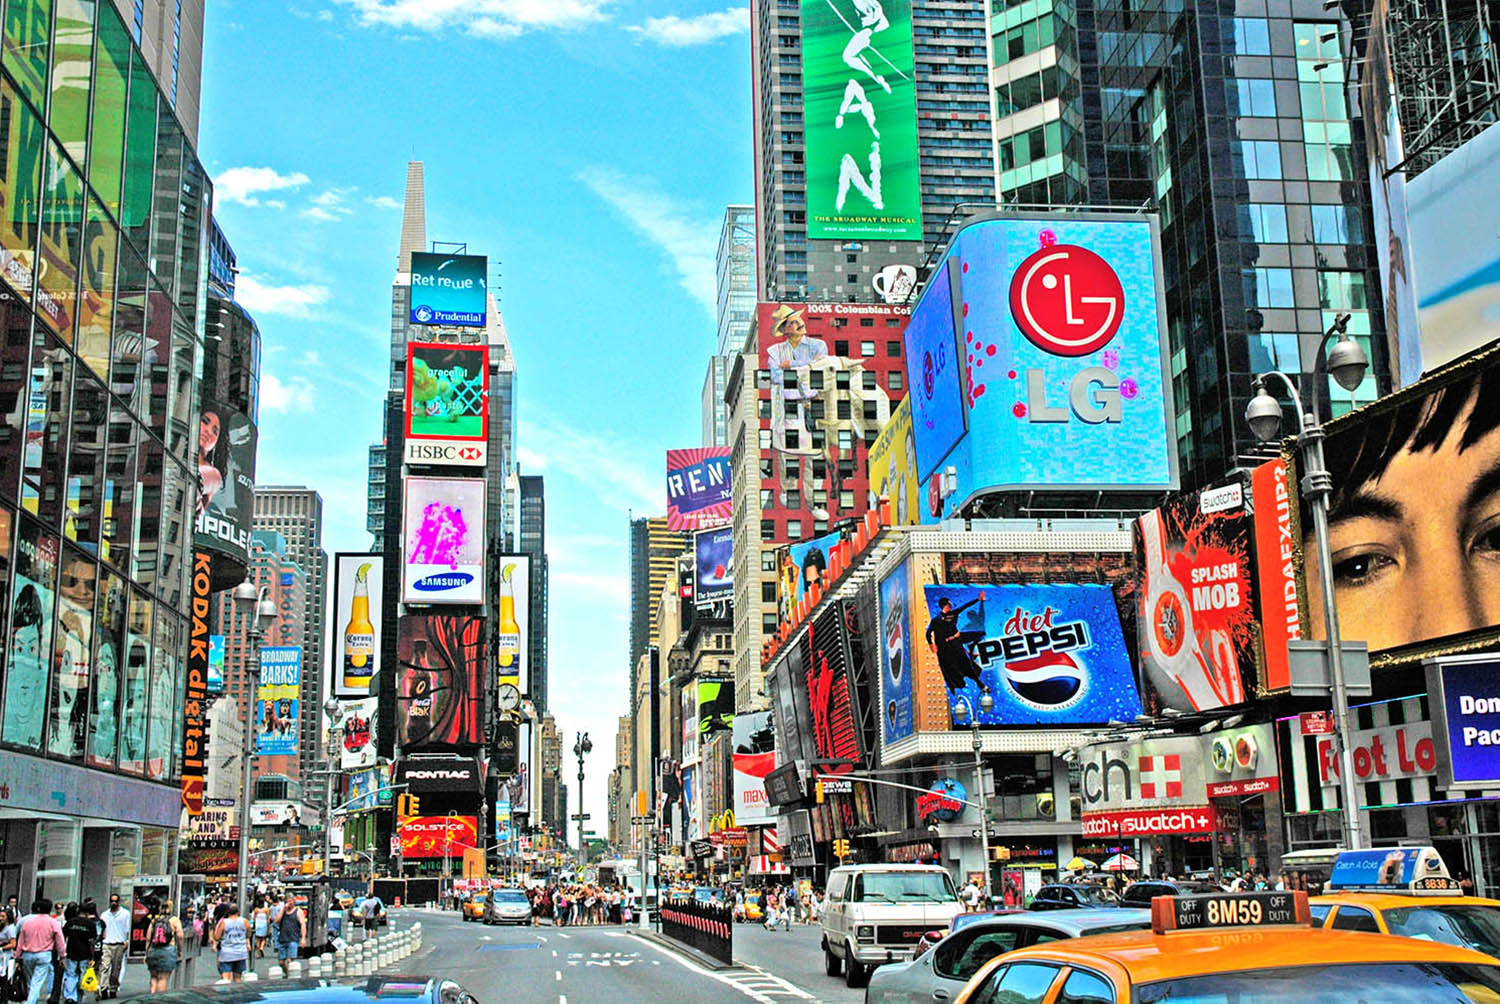 Architecture_Times_Square_New_York_City_Tourism_Signs_Advertising_Billboards_Commerce.jpg